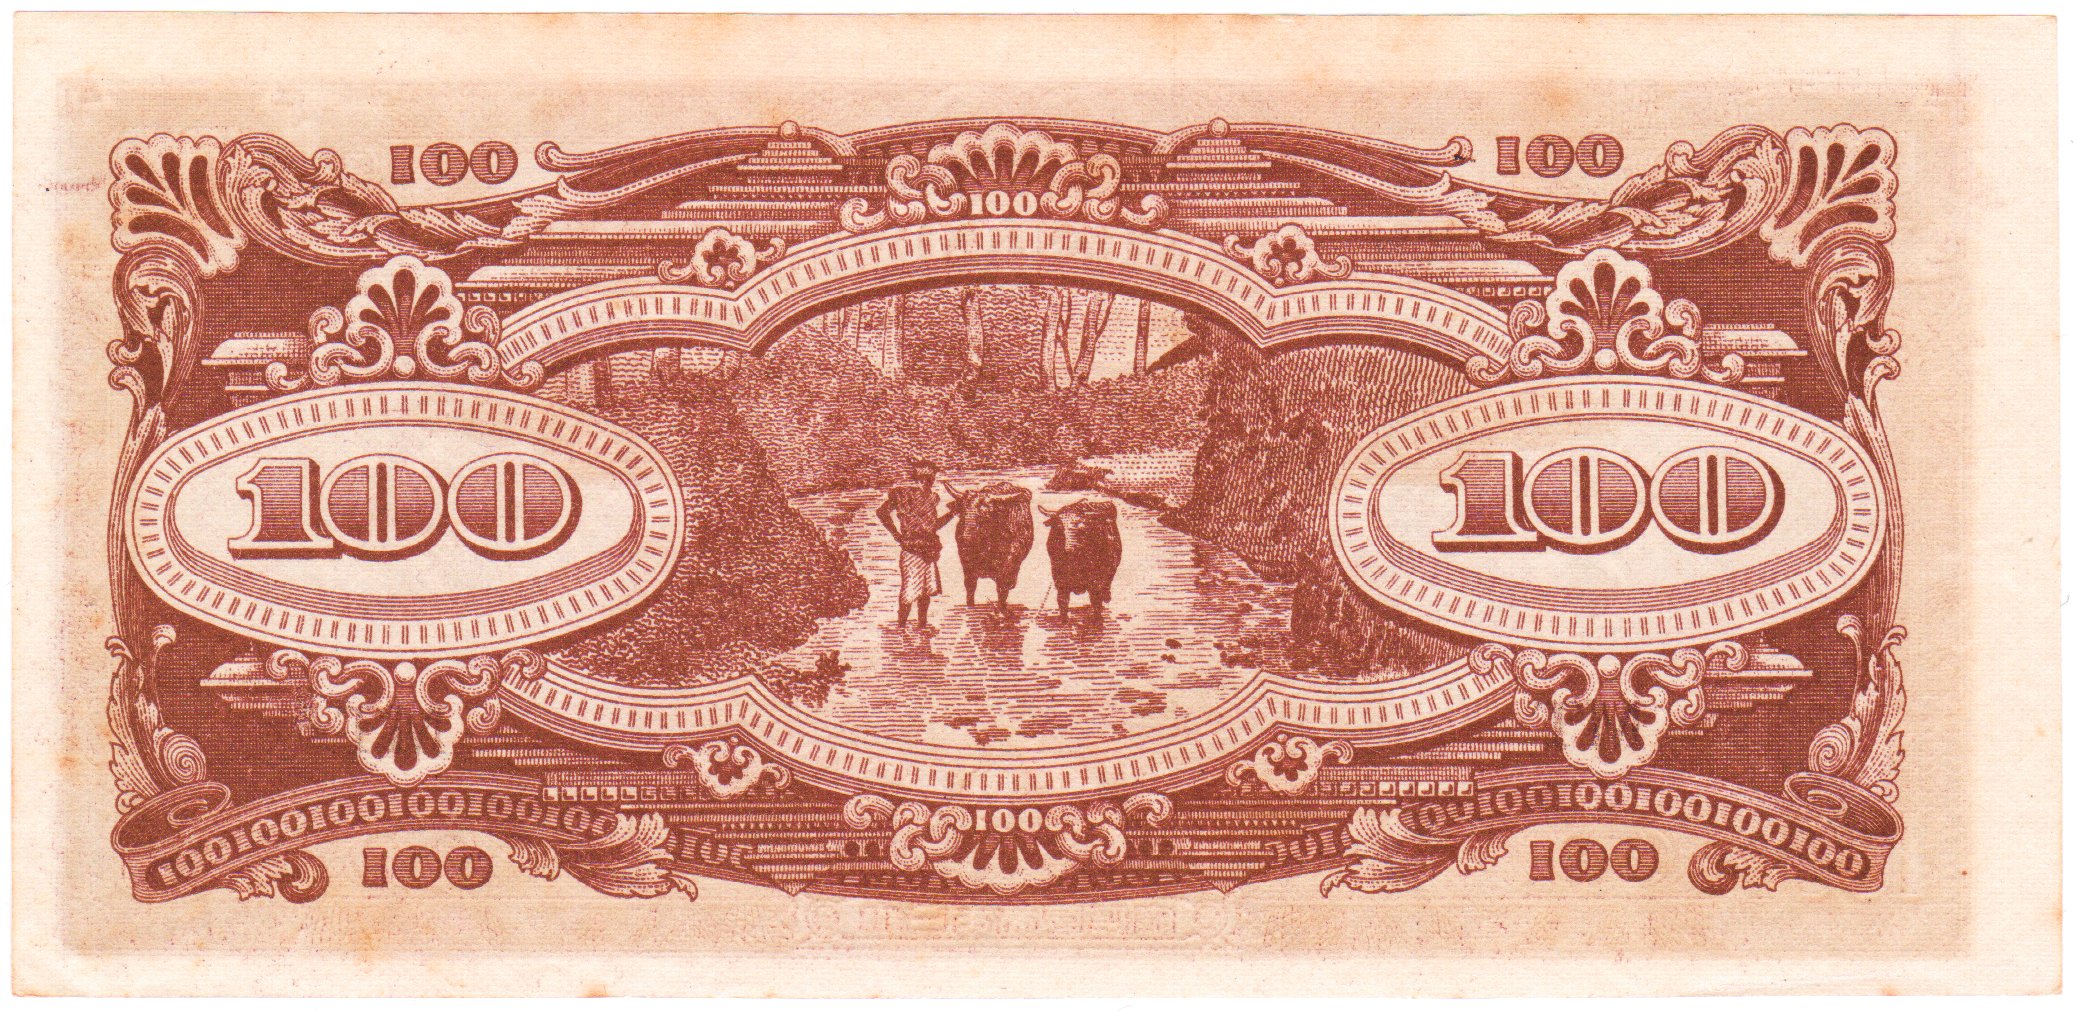 One hundred dollar note issued by the Japanese Government during the occupation of Malaya, North Borneo, Sarawak and Brunei (1944, reverse)